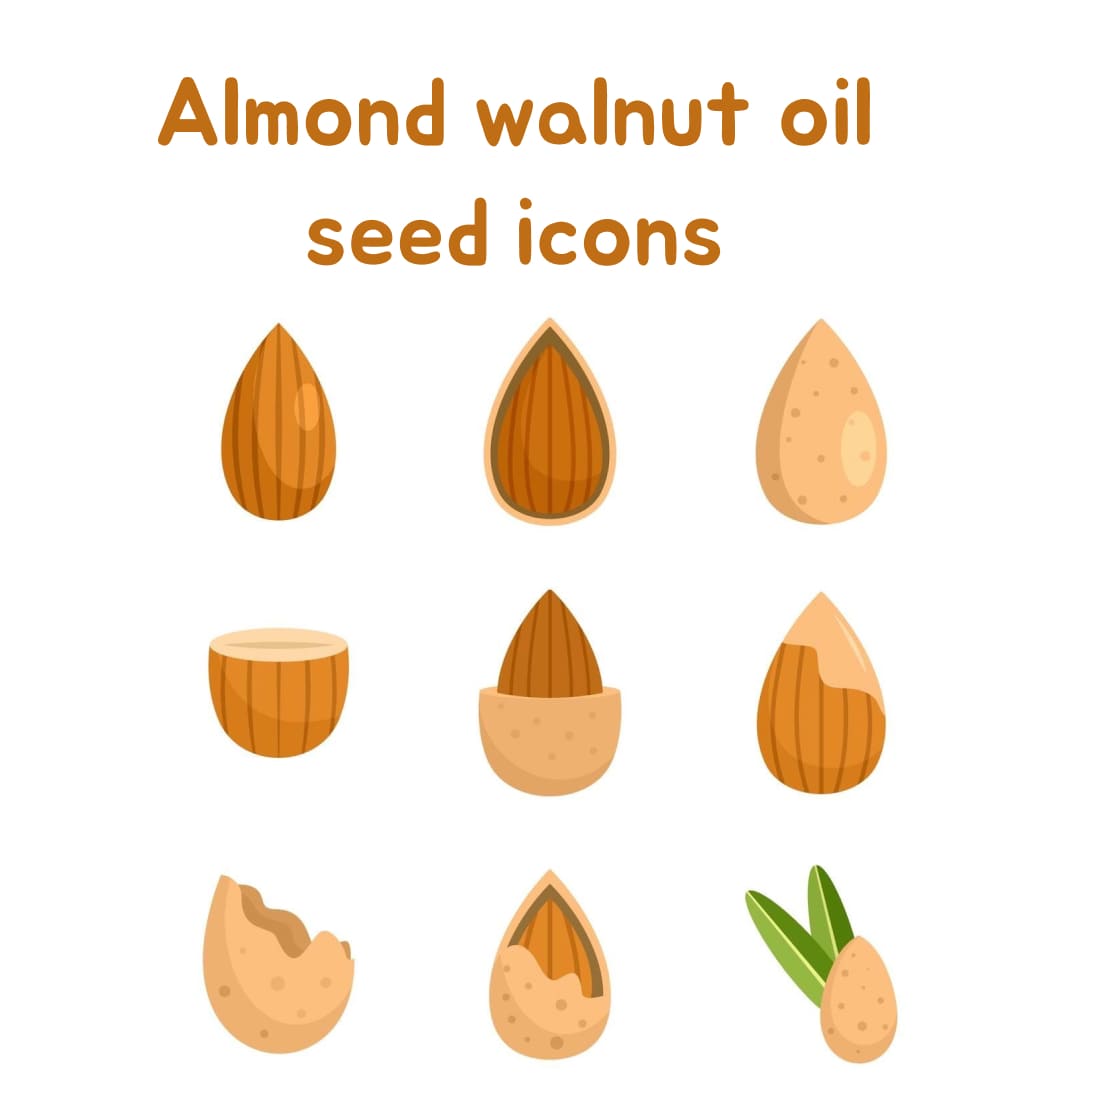 Almond walnut oil seed icons.